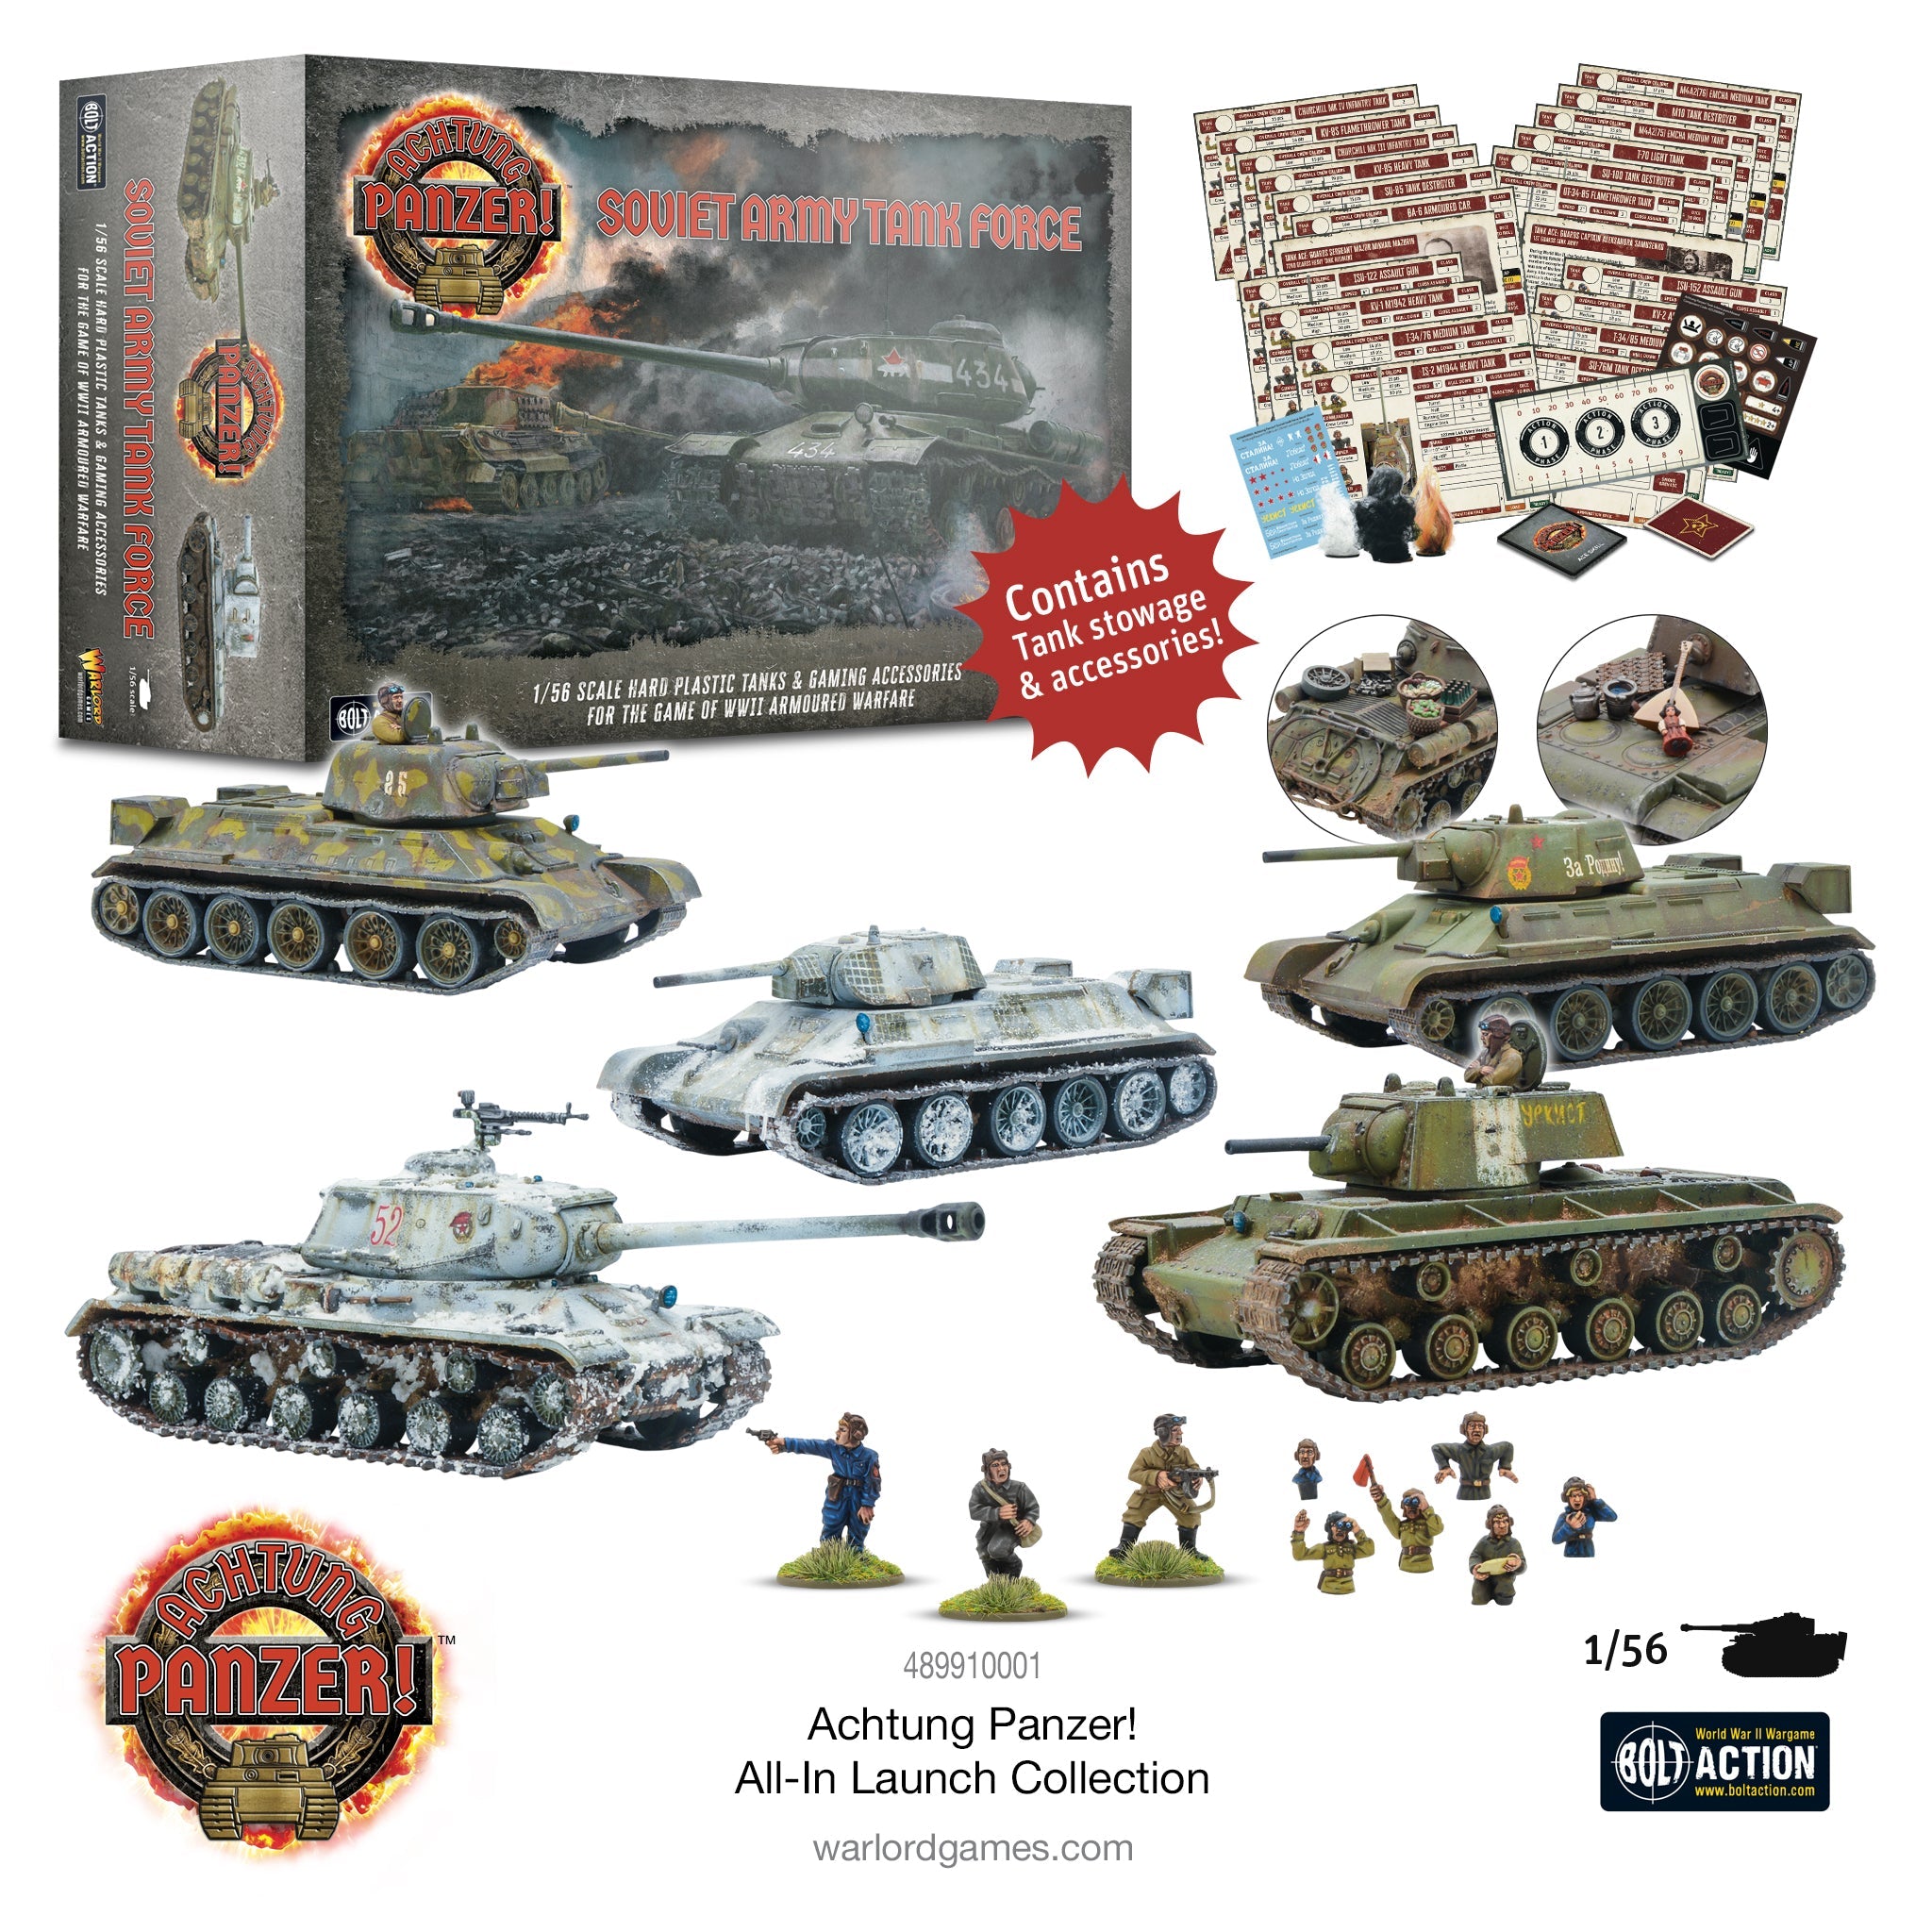 Achtung Panzer! All-In Launch Collection